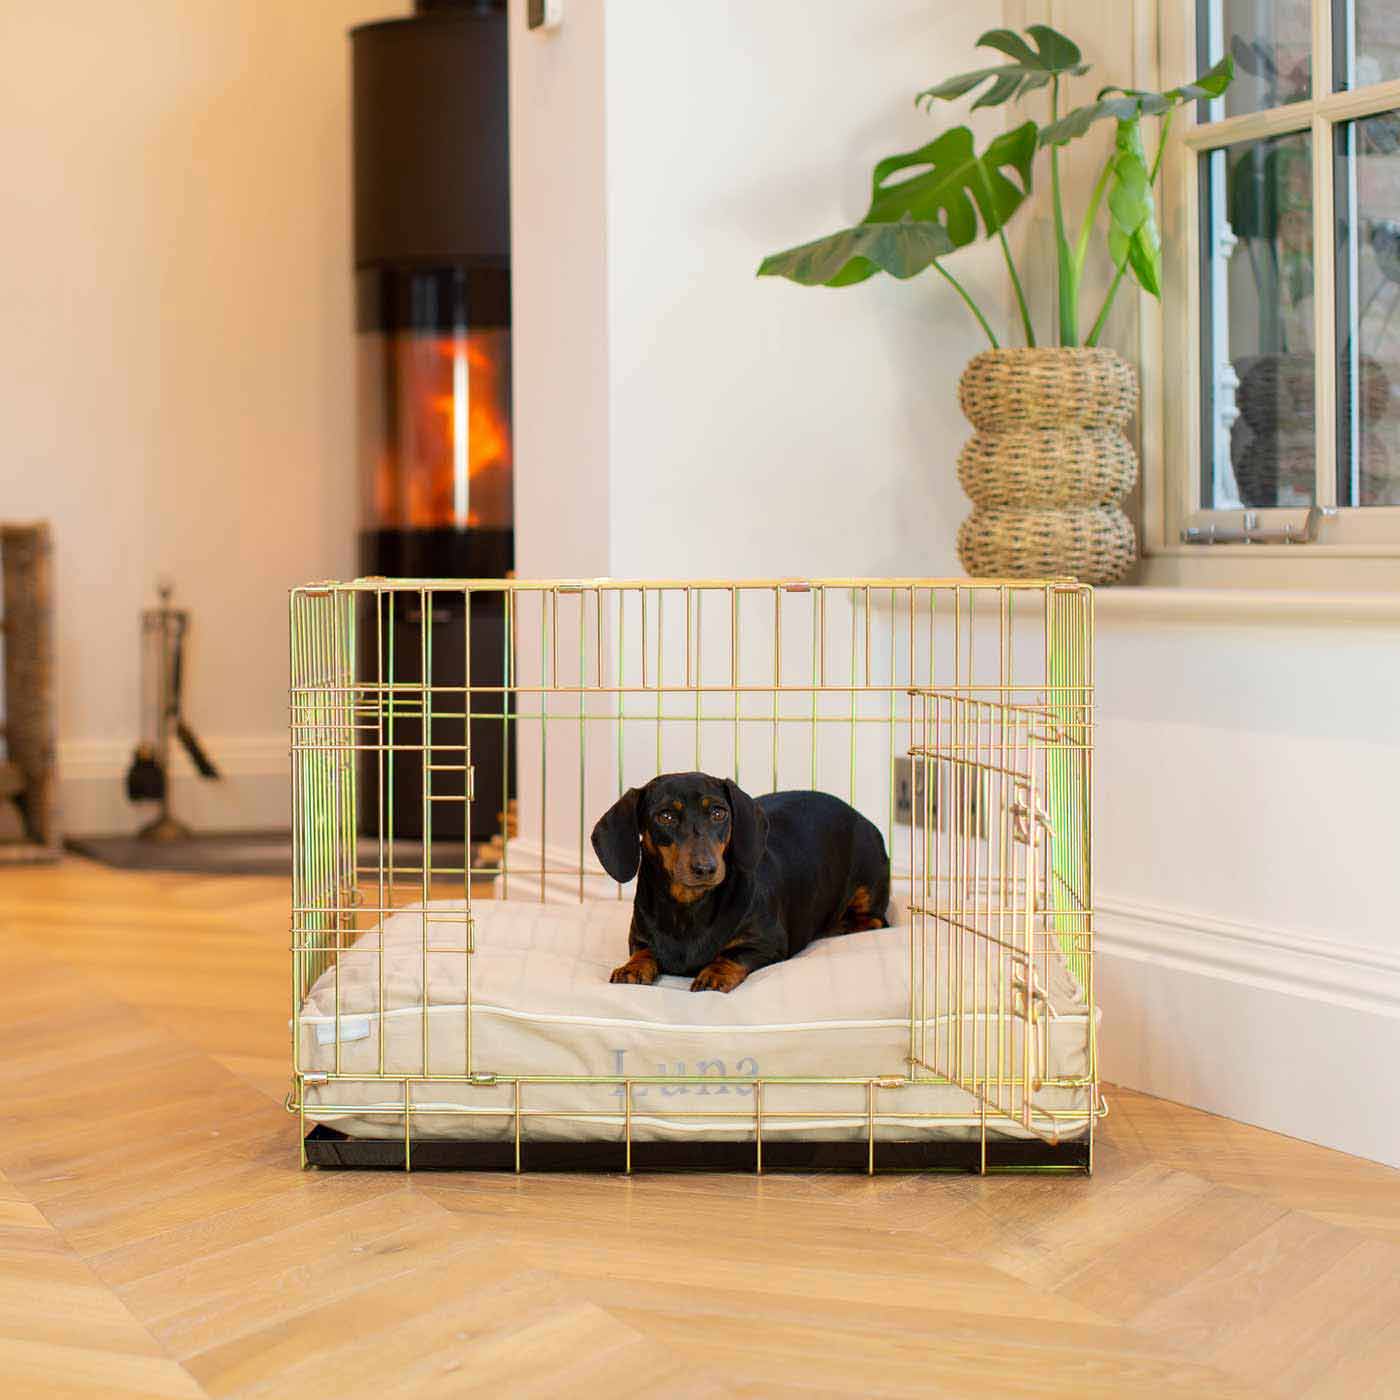 Luxury Dog Crate Cushion, Savanna Oatmeal Crate Cushion The Perfect Dog Crate Accessory, Available To Personalise Now at Lords & Labradors